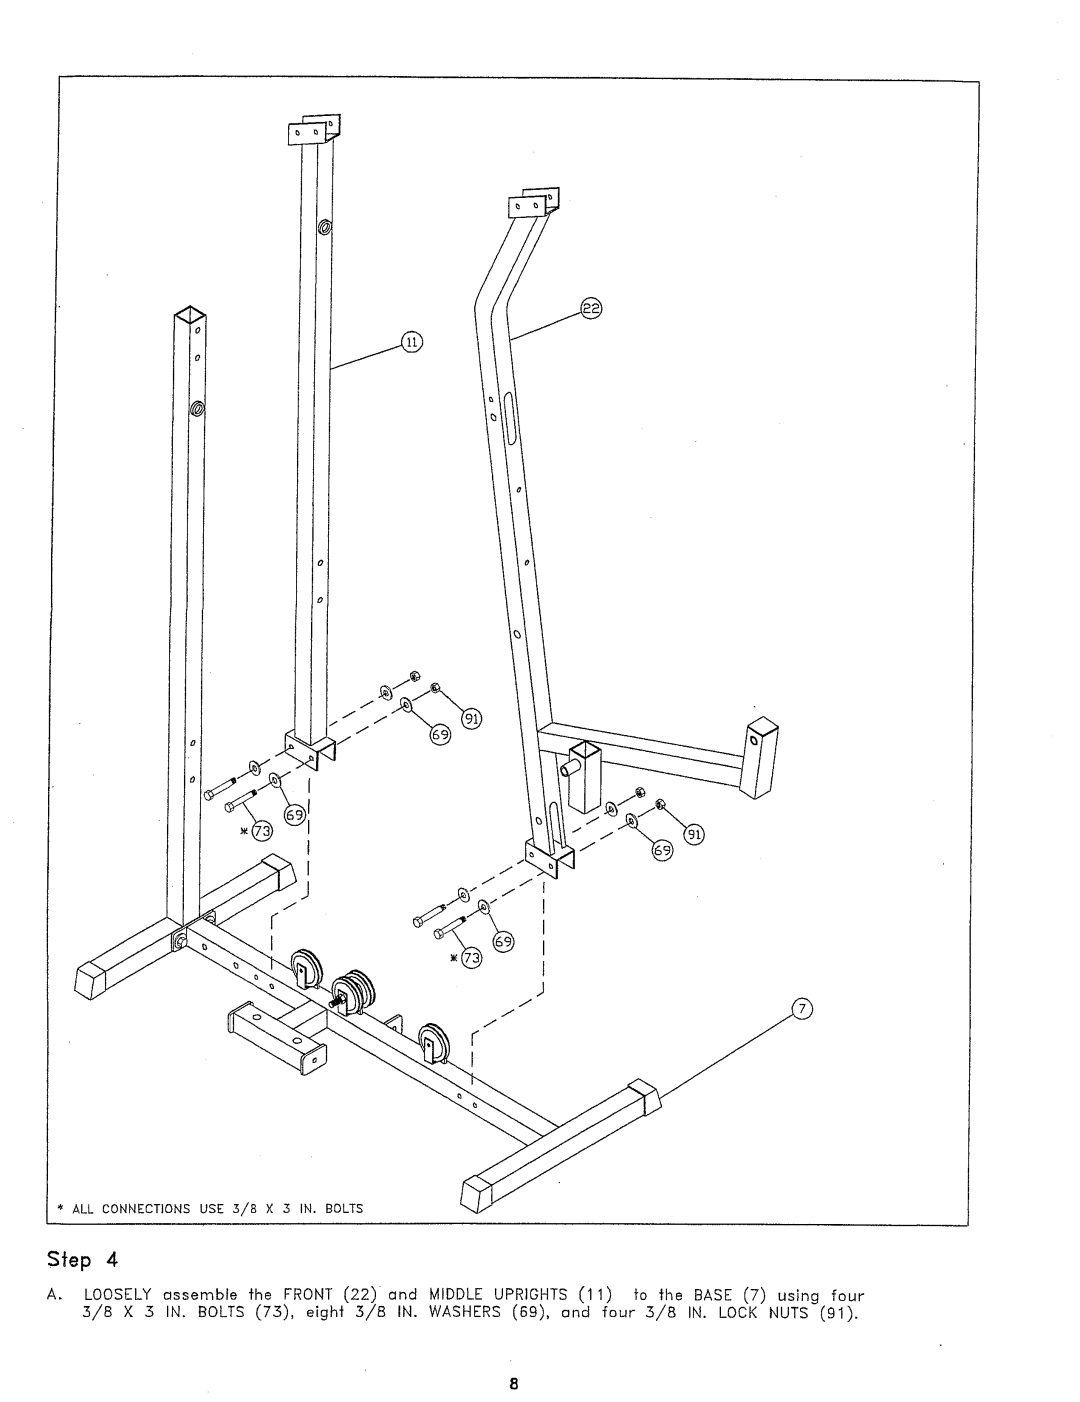 ParaBody 425 manual Sfep, ALLCONNECTIONSUSE5/8 × 5 IN. BOLTS 